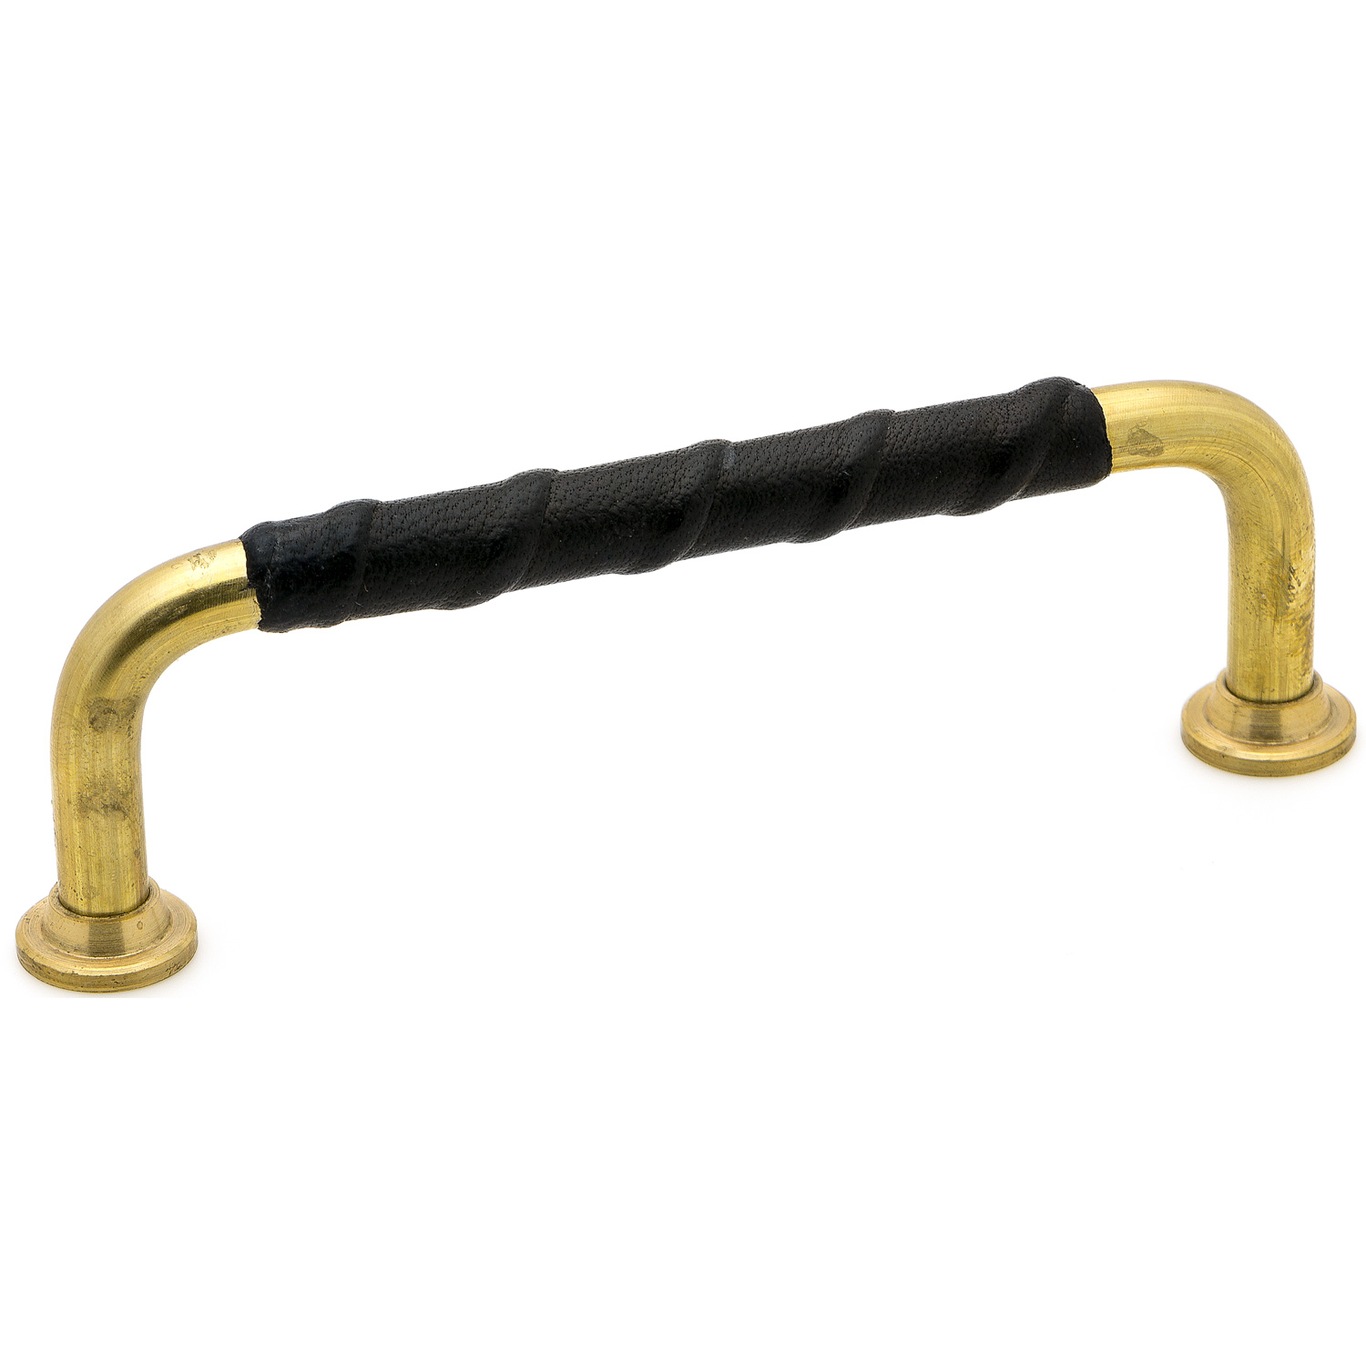 1353-96 Leather Handle, Black/Untreated Brass